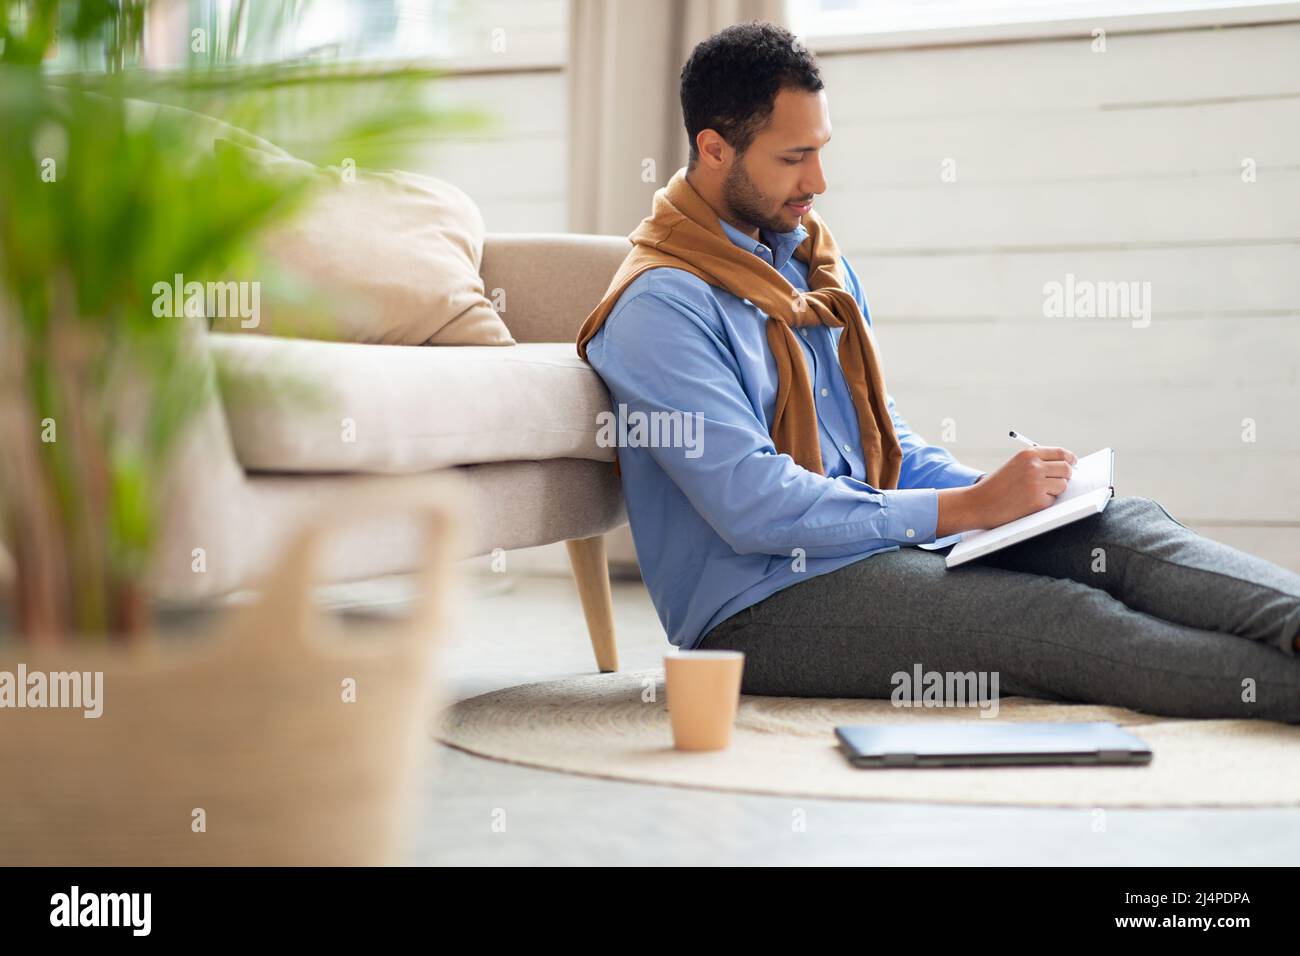 Portrait of young Arab man writing in notebook Stock Photo